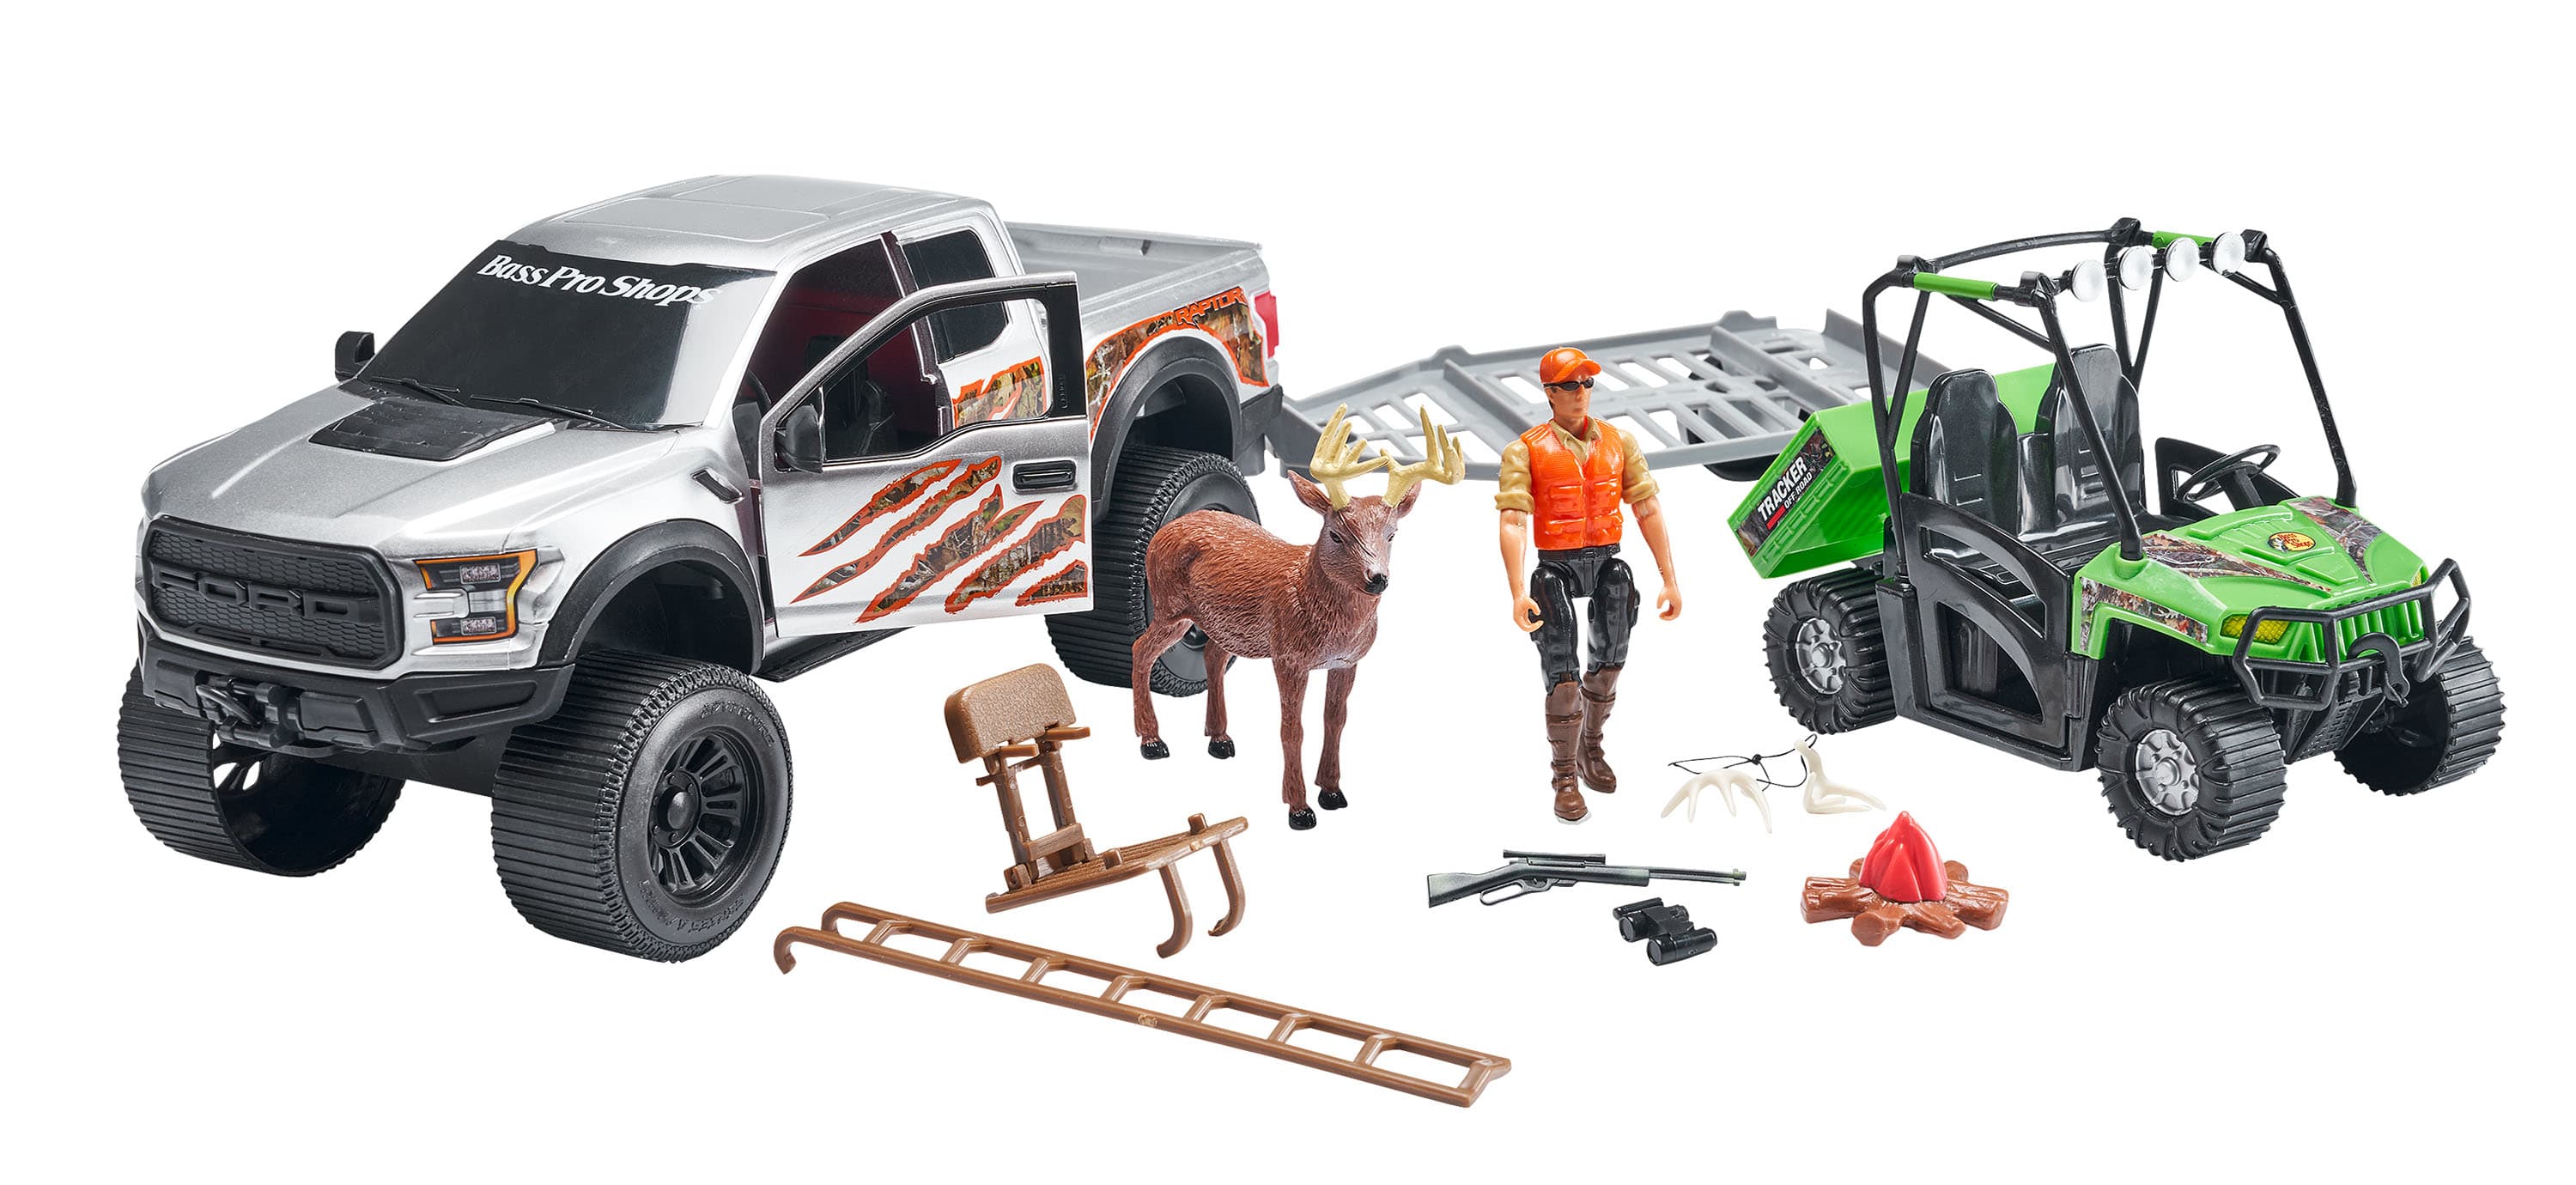 Bass Pro Shops® Deluxe Licensed Ford® Raptor TrueTimber® Camo Adventure Truck Playset for Kids